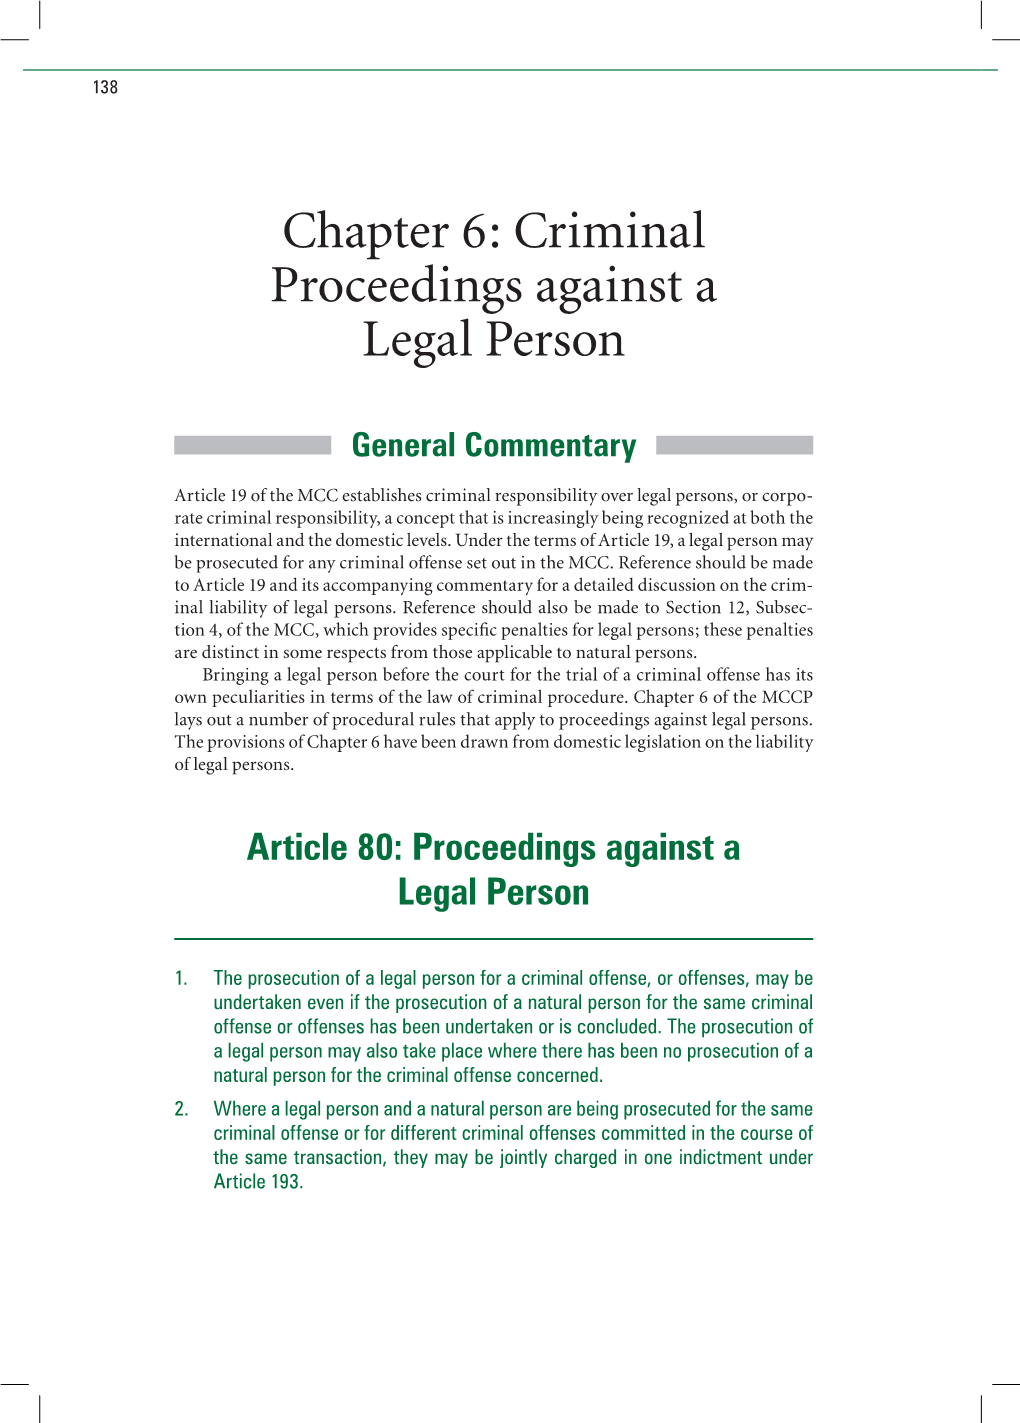 Chapter 6: Criminal Proceedings Against a Legal Person